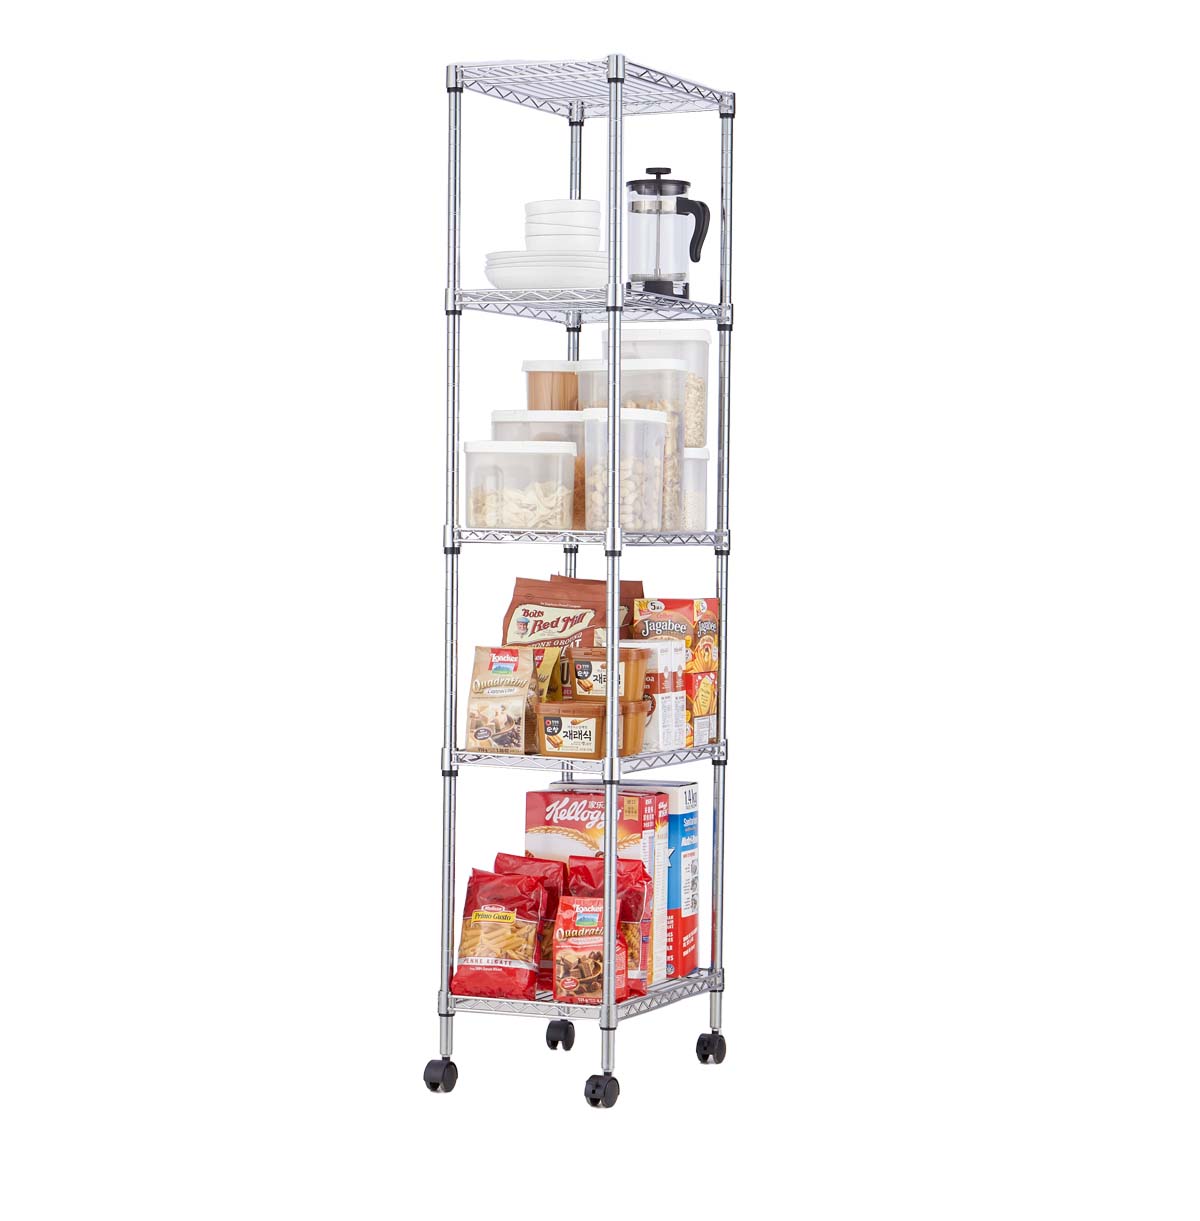 cabinet organizer and storage shelves Production